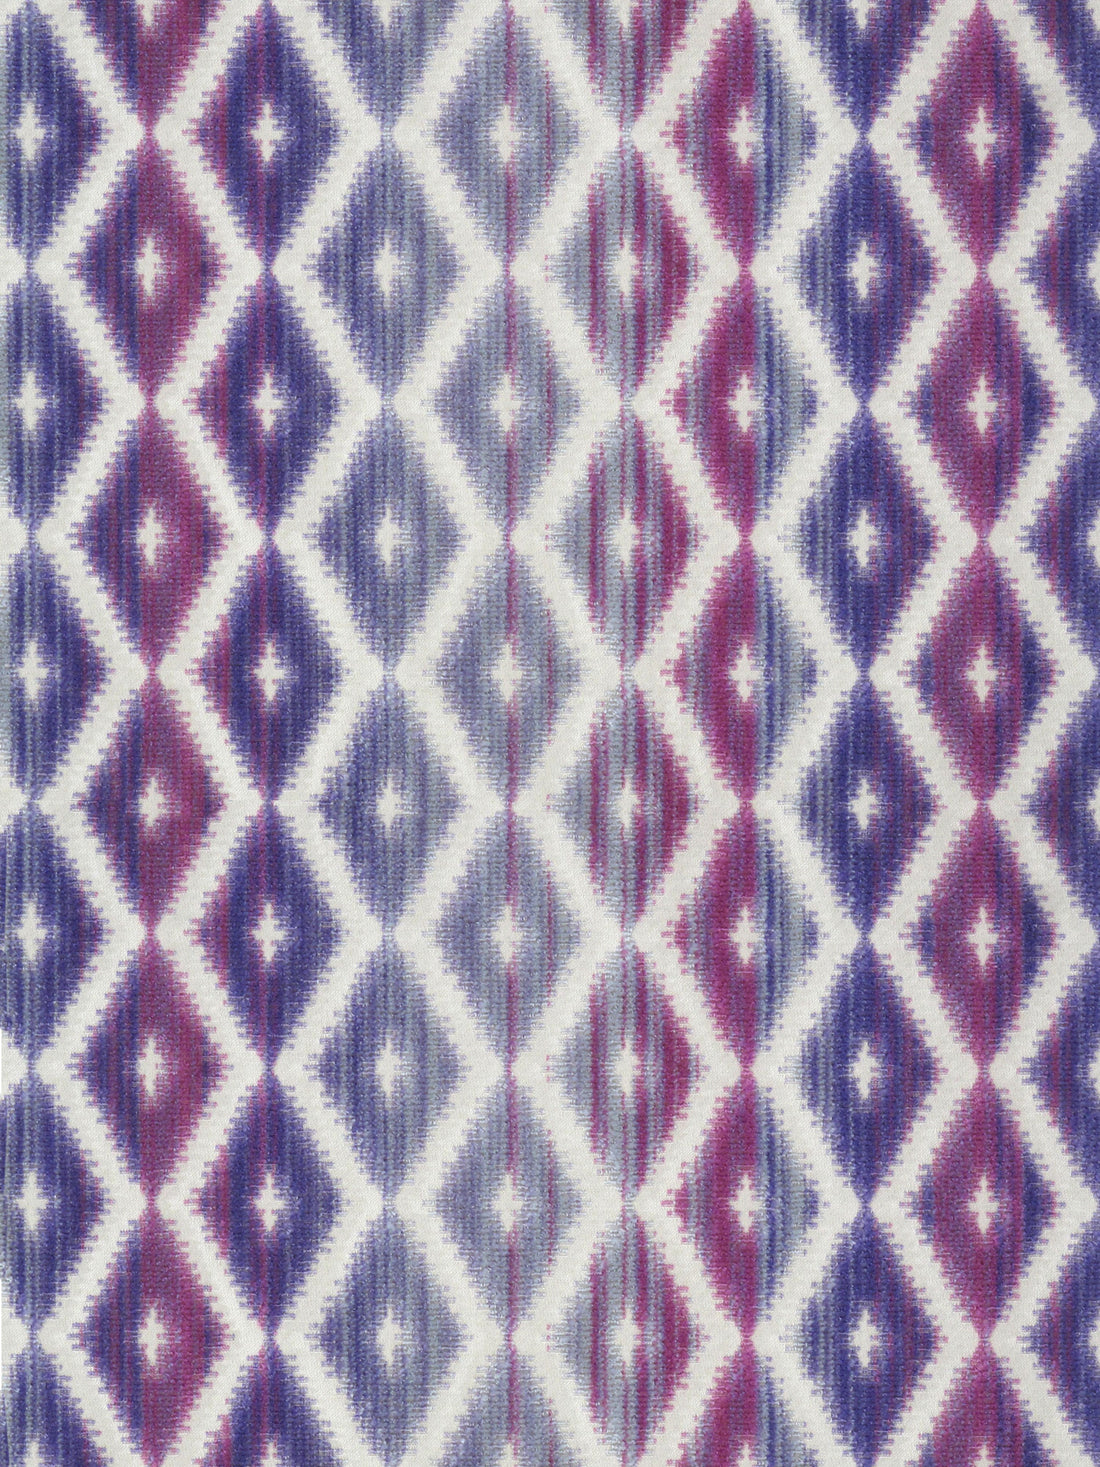 Diamantina fabric in lilac color - pattern number SI 00111316 - by Scalamandre in the Old World Weavers collection